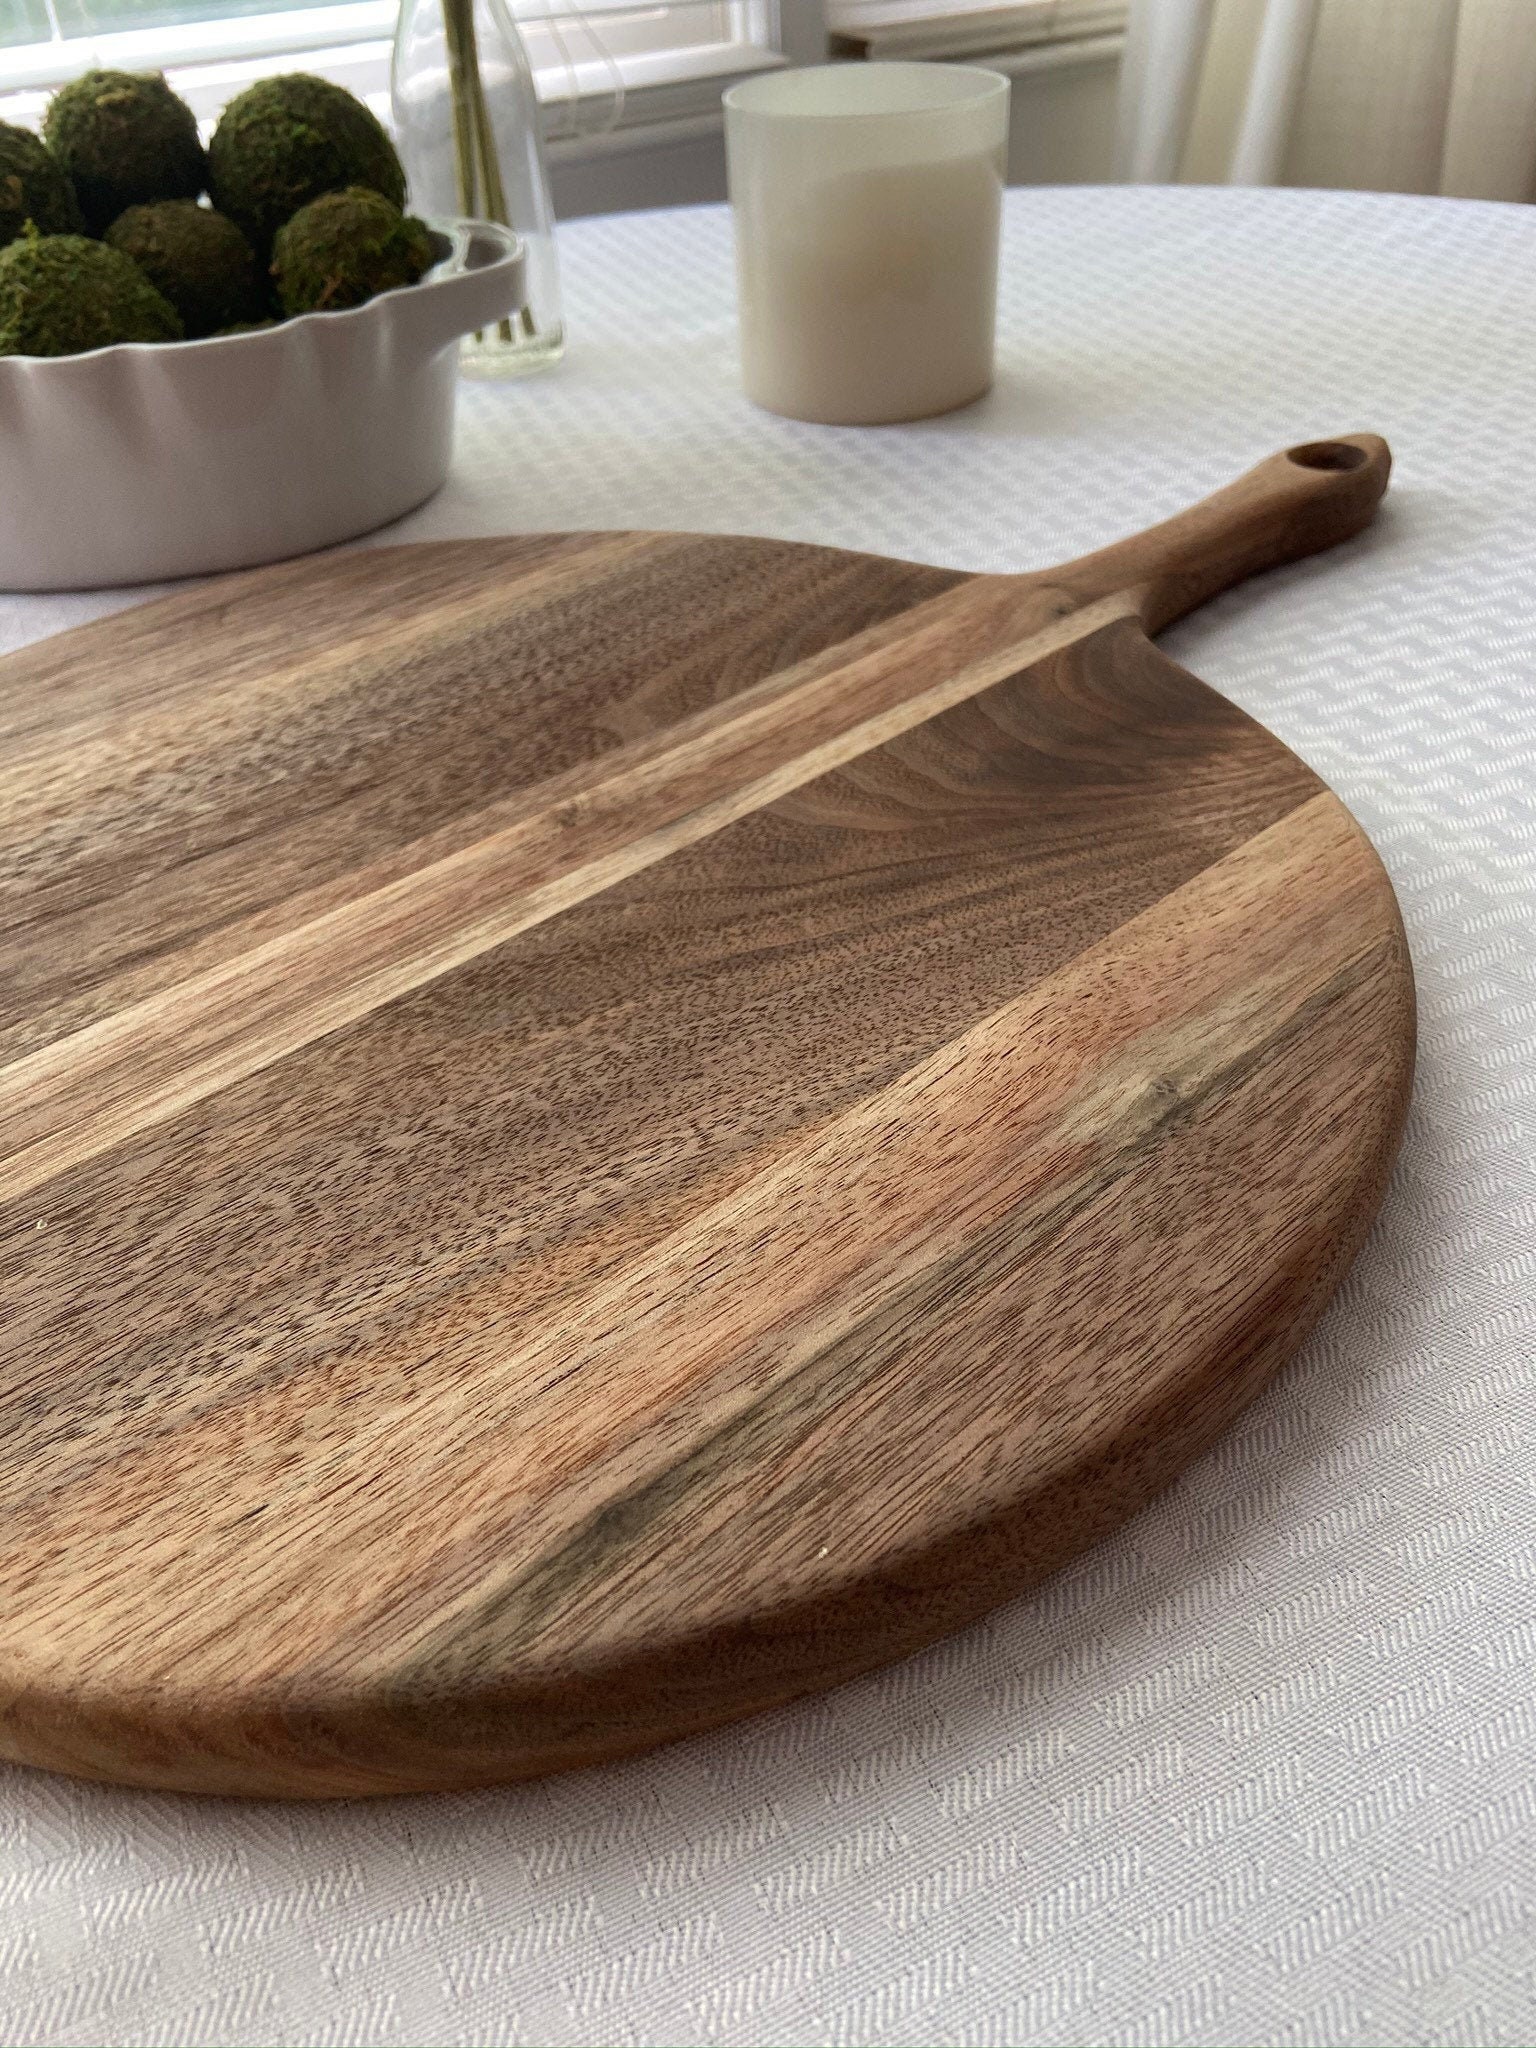 5/8 Thick Traditional Cutting Boards